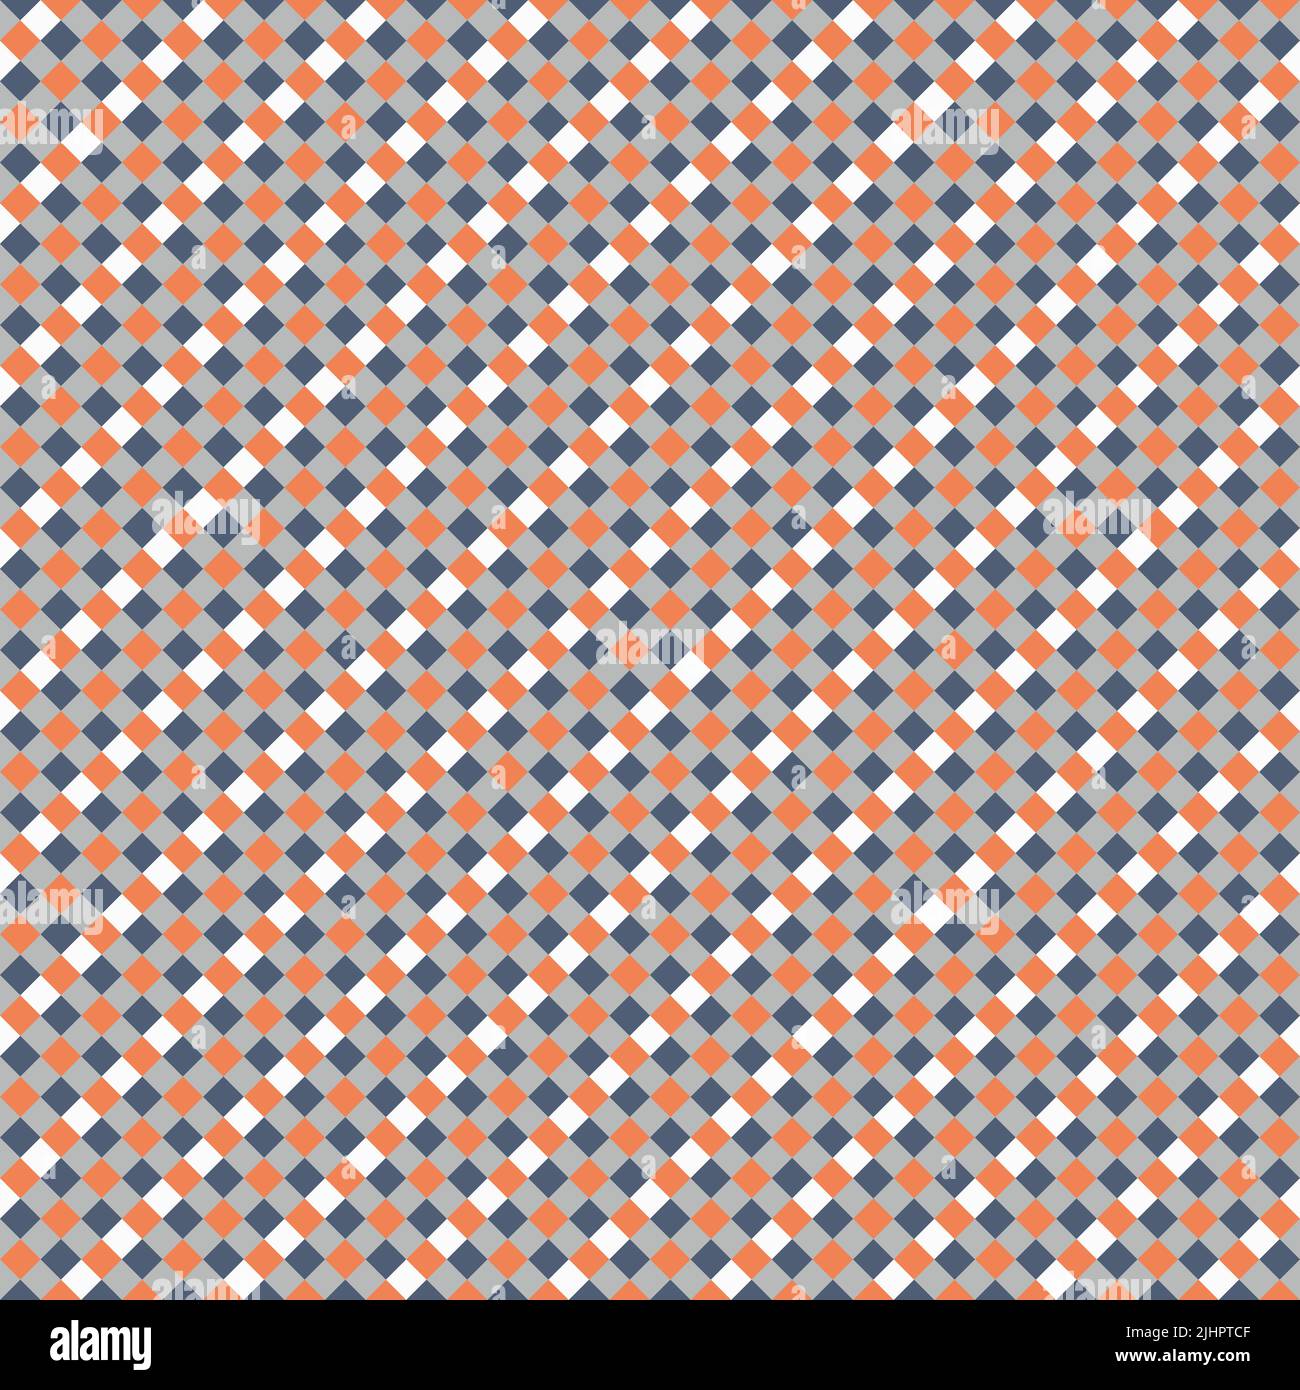 https://c8.alamy.com/comp/2JHPTCF/white-gray-orange-seamless-small-diagonal-french-checkered-pattern-little-inclined-colorful-fabric-check-pattern-background-45-degrees-classic-check-2JHPTCF.jpg